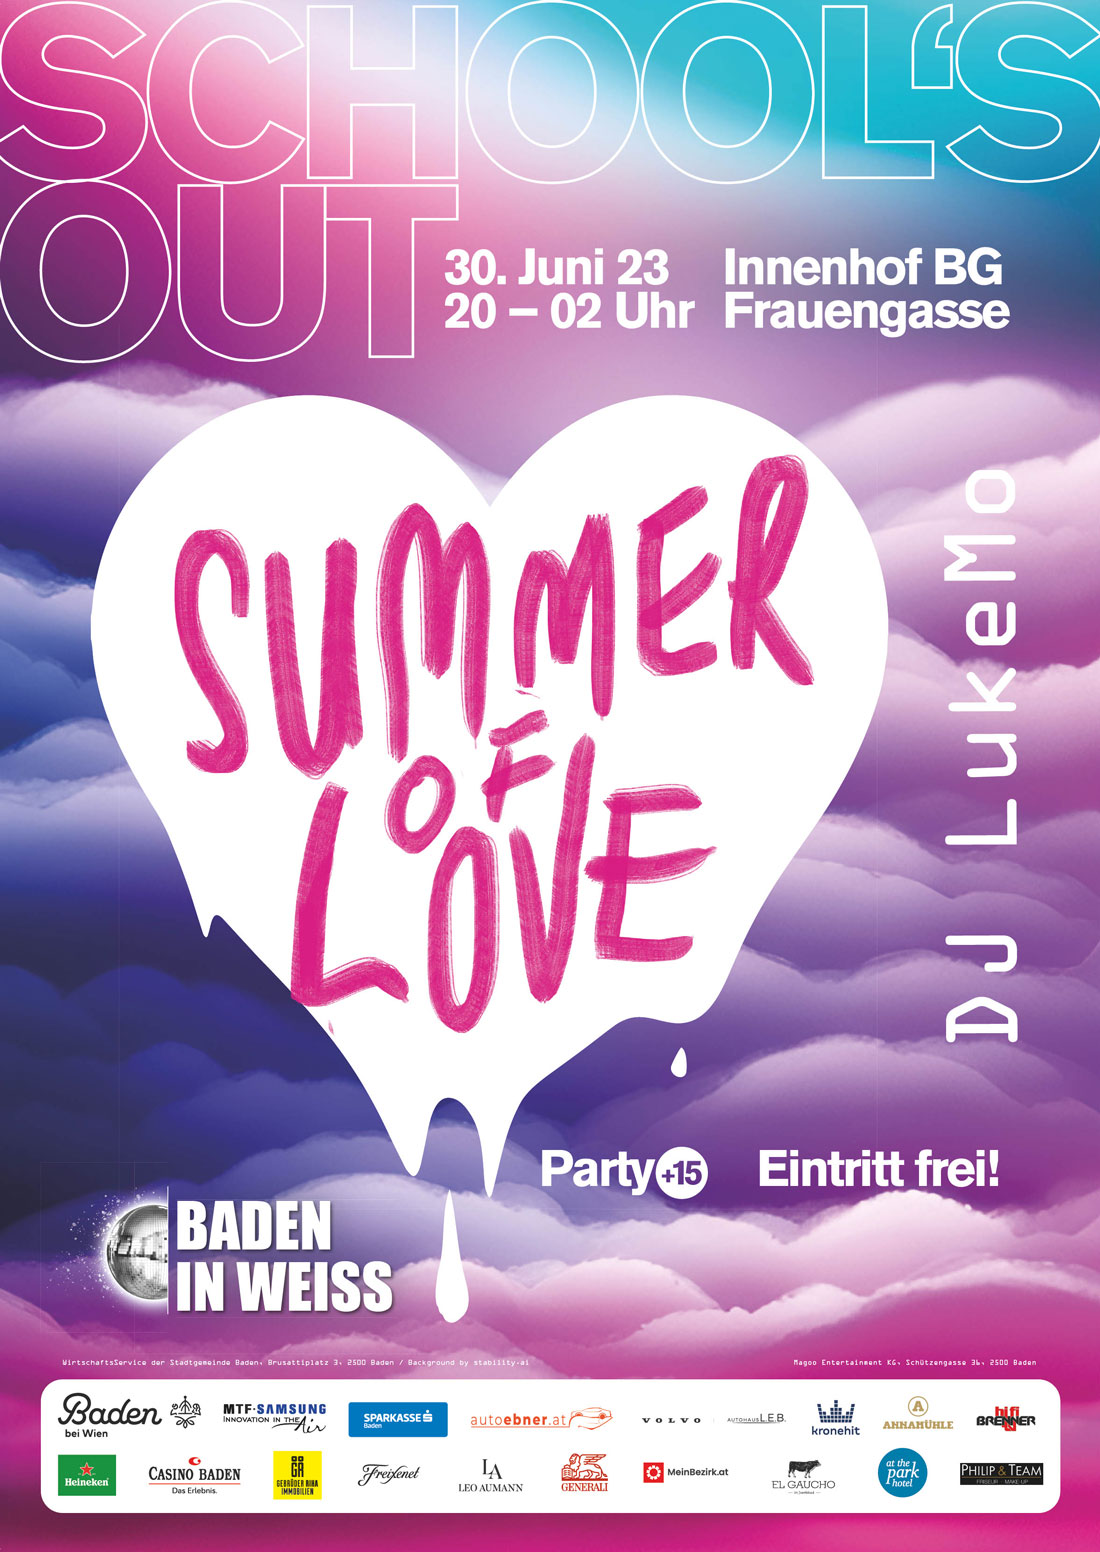 Baden in Weiss - Schools Out - Summer of Love